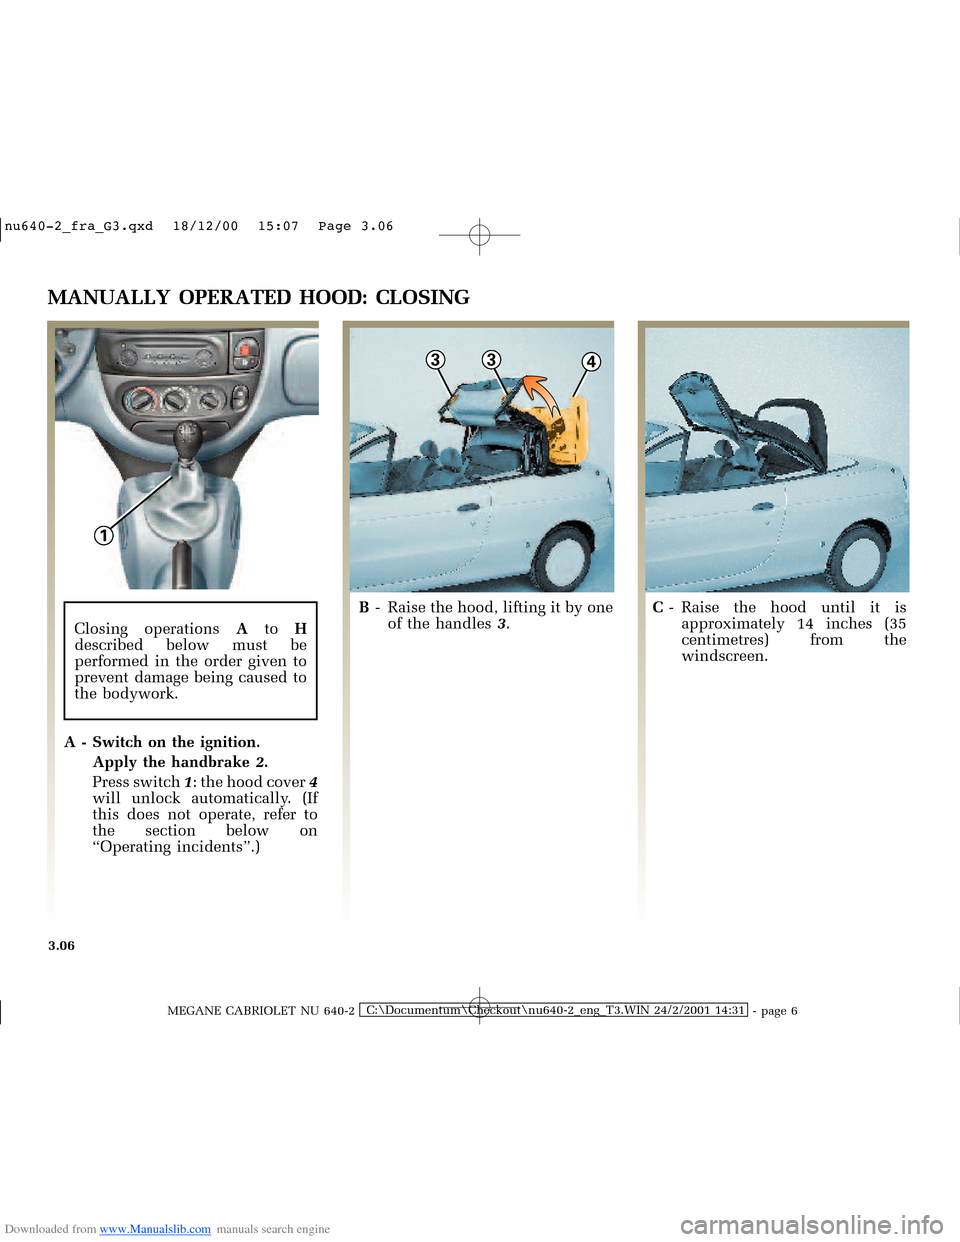 RENAULT MEGANE 2000 X64 / 1.G Owners Manual Downloaded from www.Manualslib.com manuals search engine 1
433
�Q�X������B�I�U�D�B�*���T�[�G� � ��������� � ������ � �3�D�J�H� ����
MEGANE CABRIOLET NU 640-2C:\Documentu